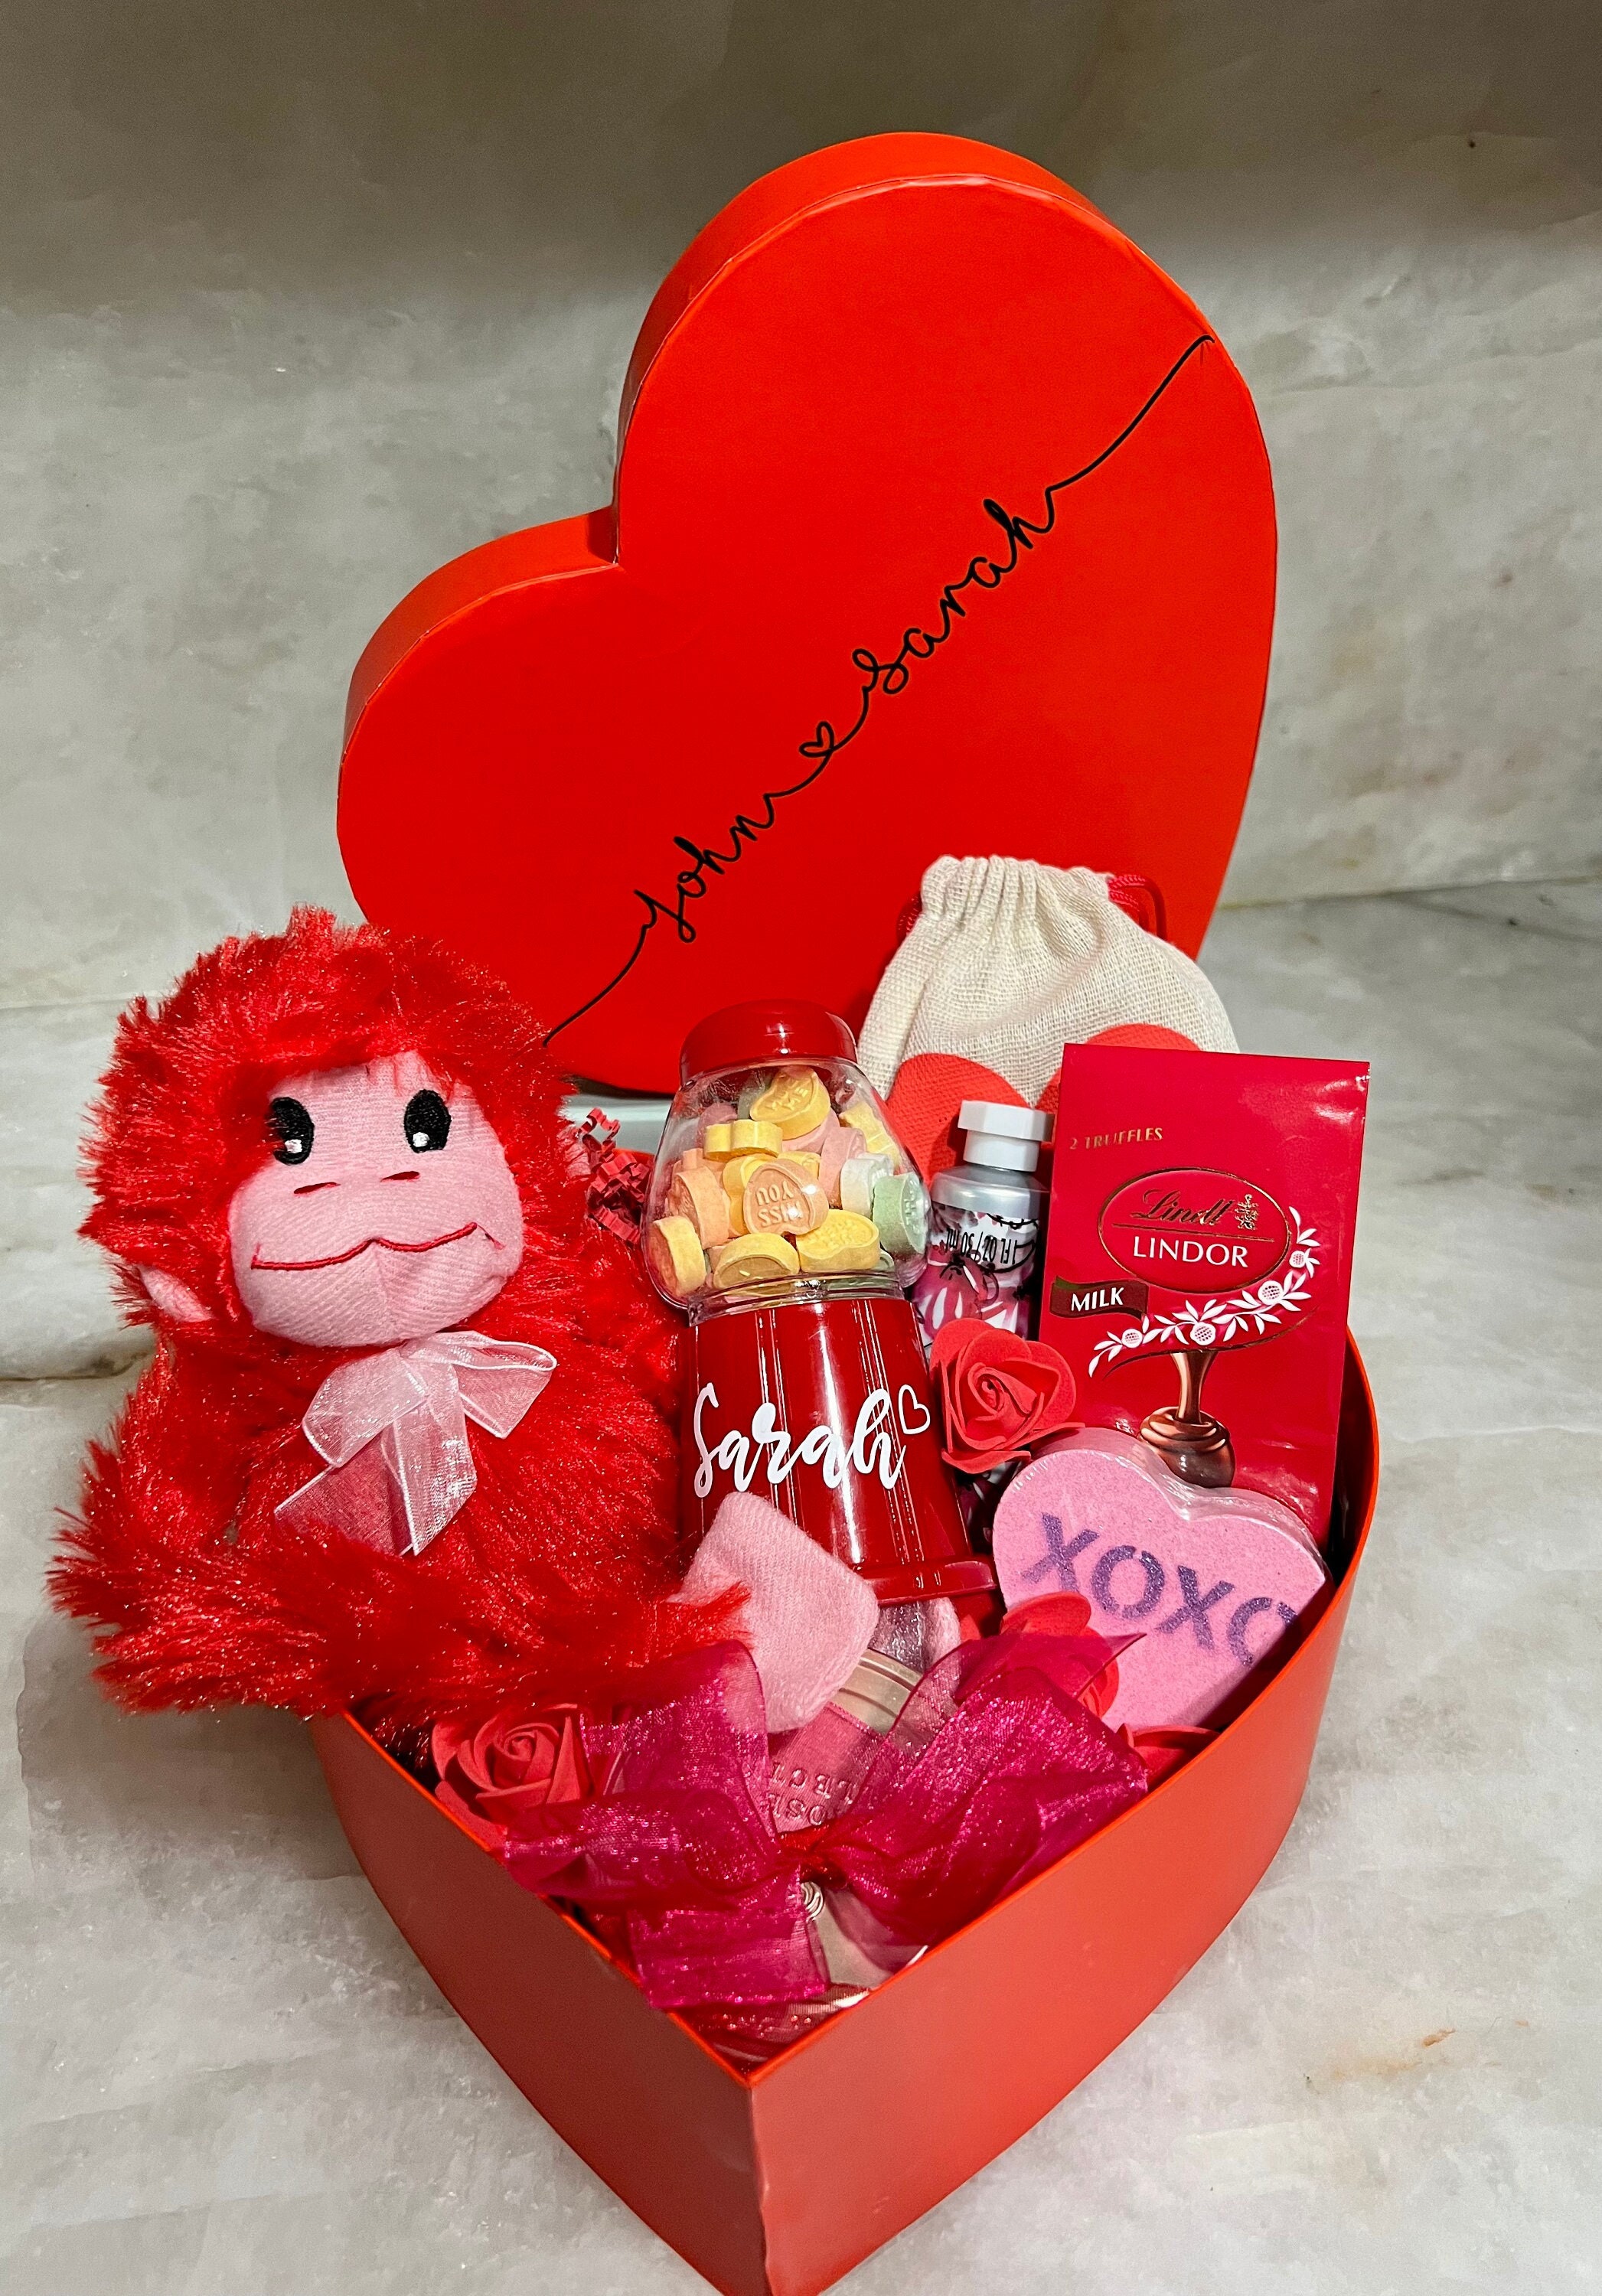 TOP 25 BIRTHDAY GIFT IDEAS FOR BOYFRIEND ONLINE – Valentines Day Gifts,  Cakes, Flowers for Her, Him